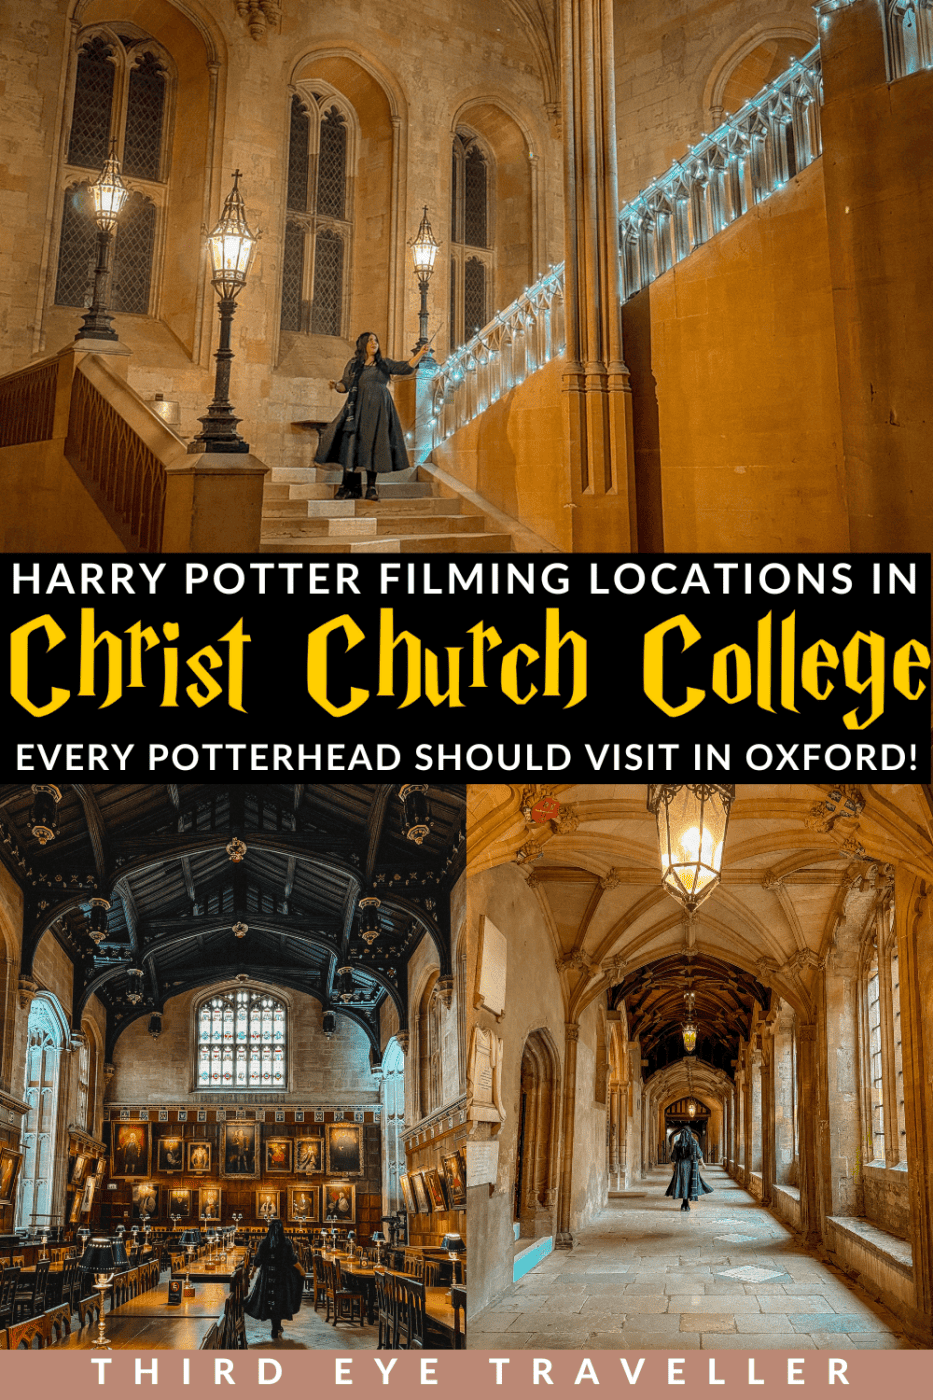 Harry Potter Christ Church Filming locations in Oxford